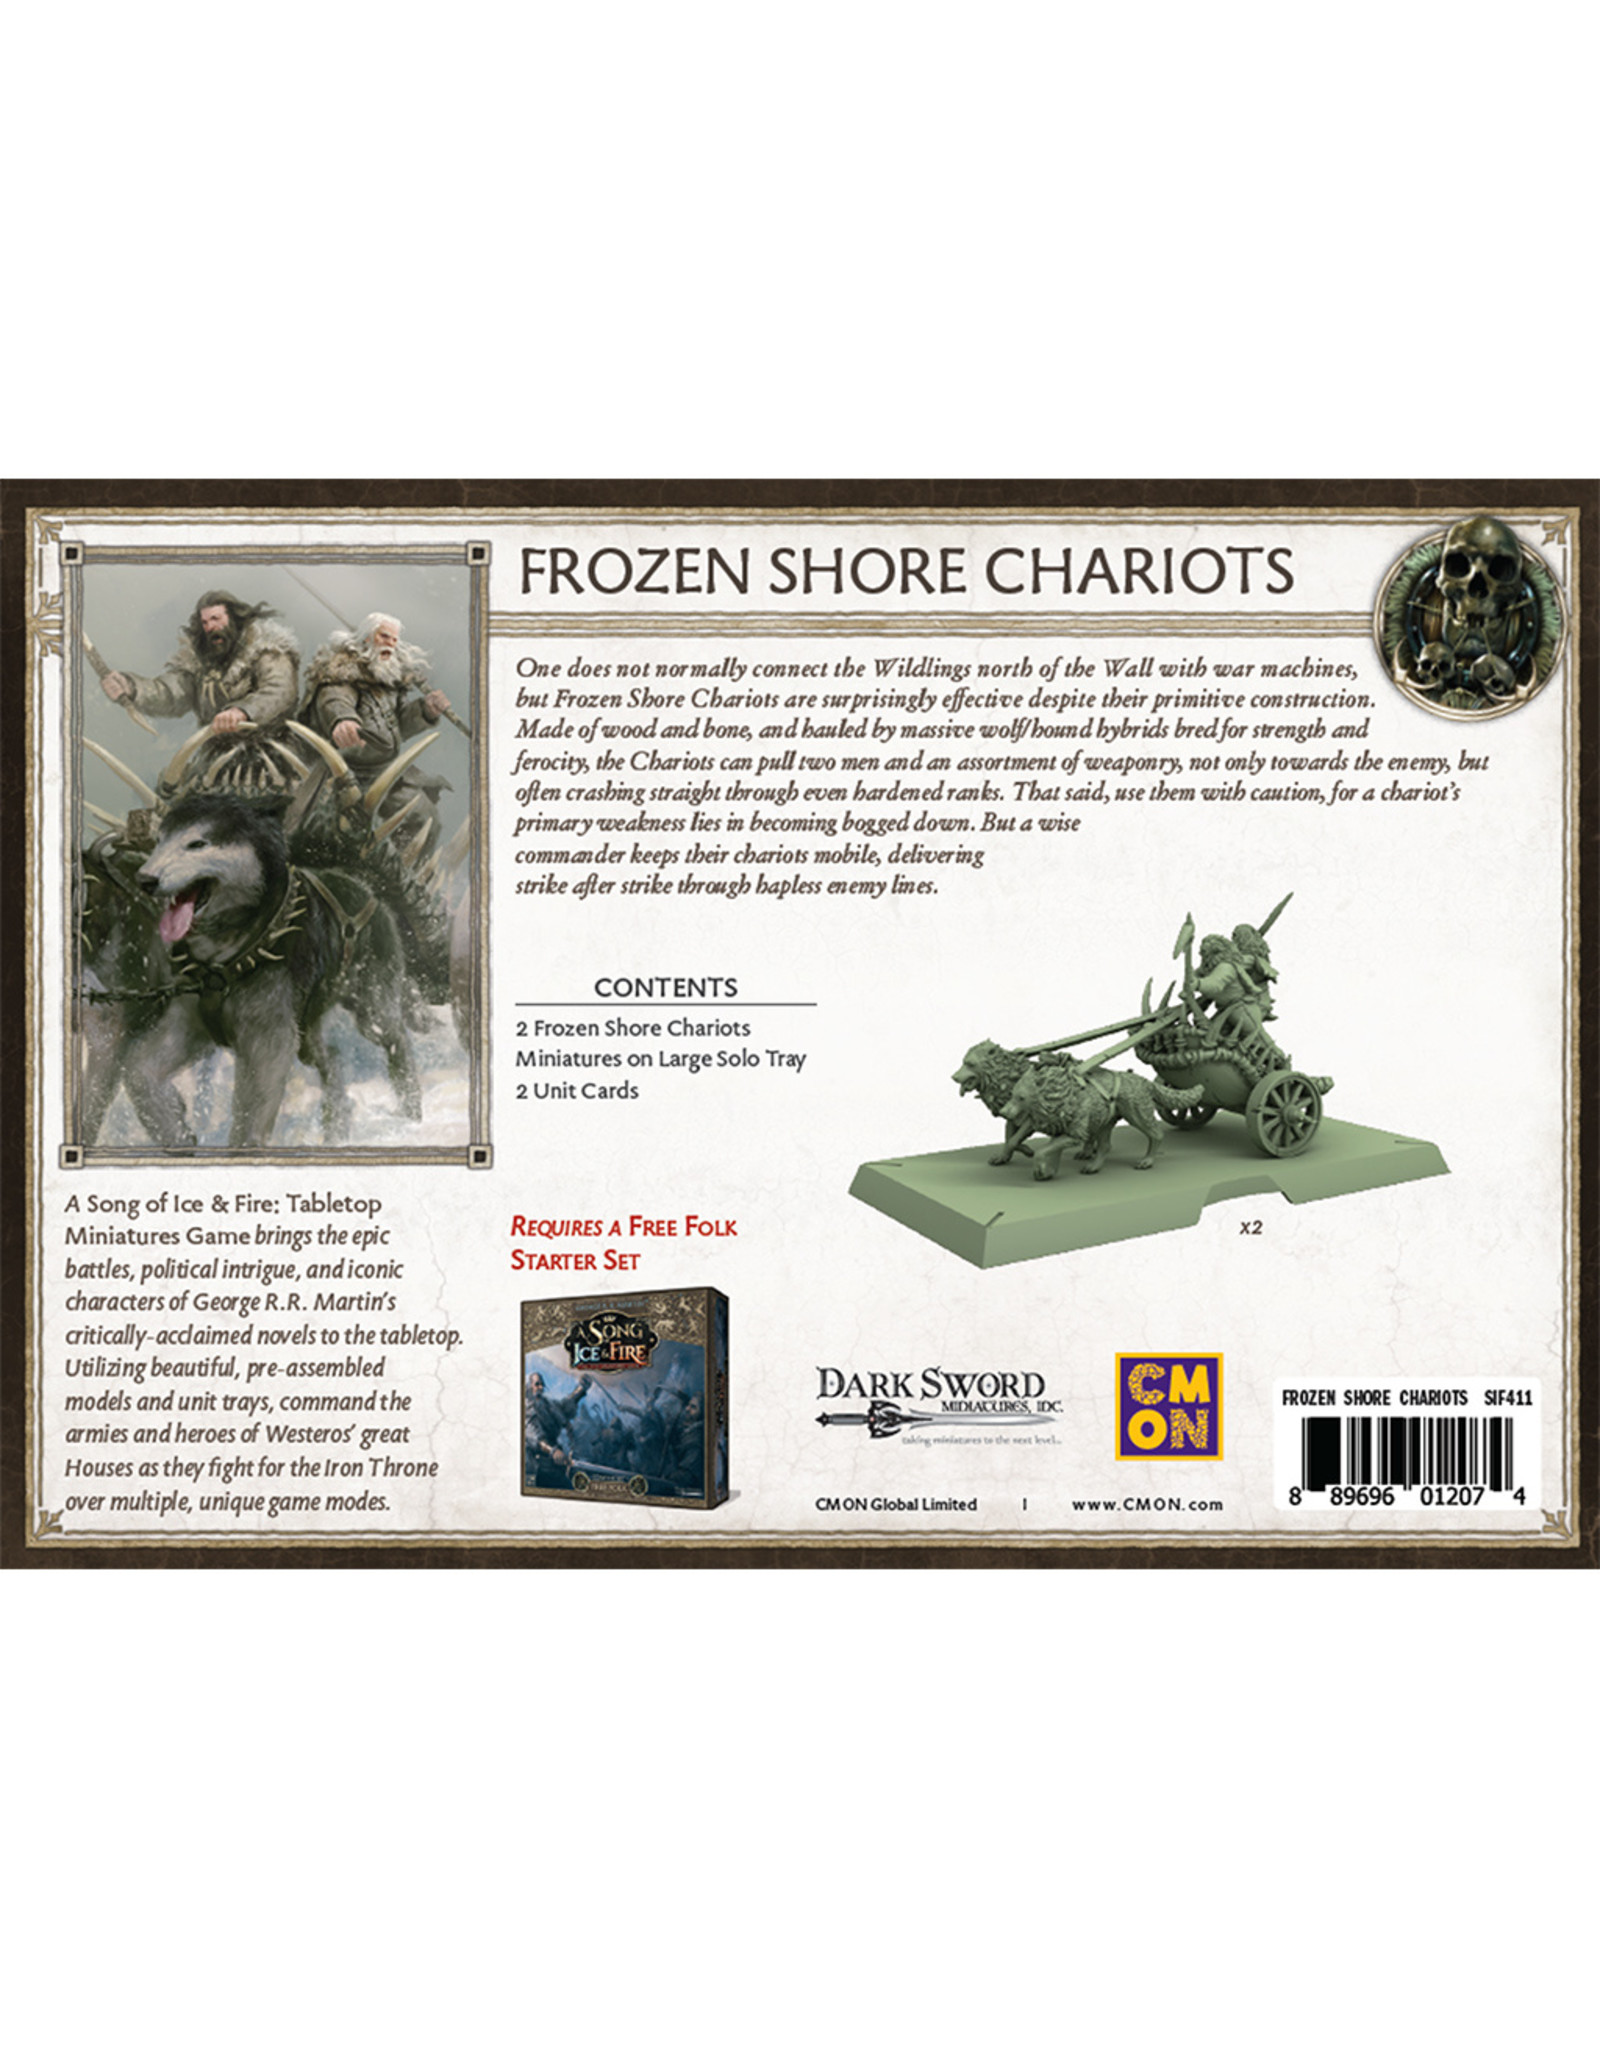 Cool Mini or Not A Song of Ice and Fire: Frozen Shore Chariots